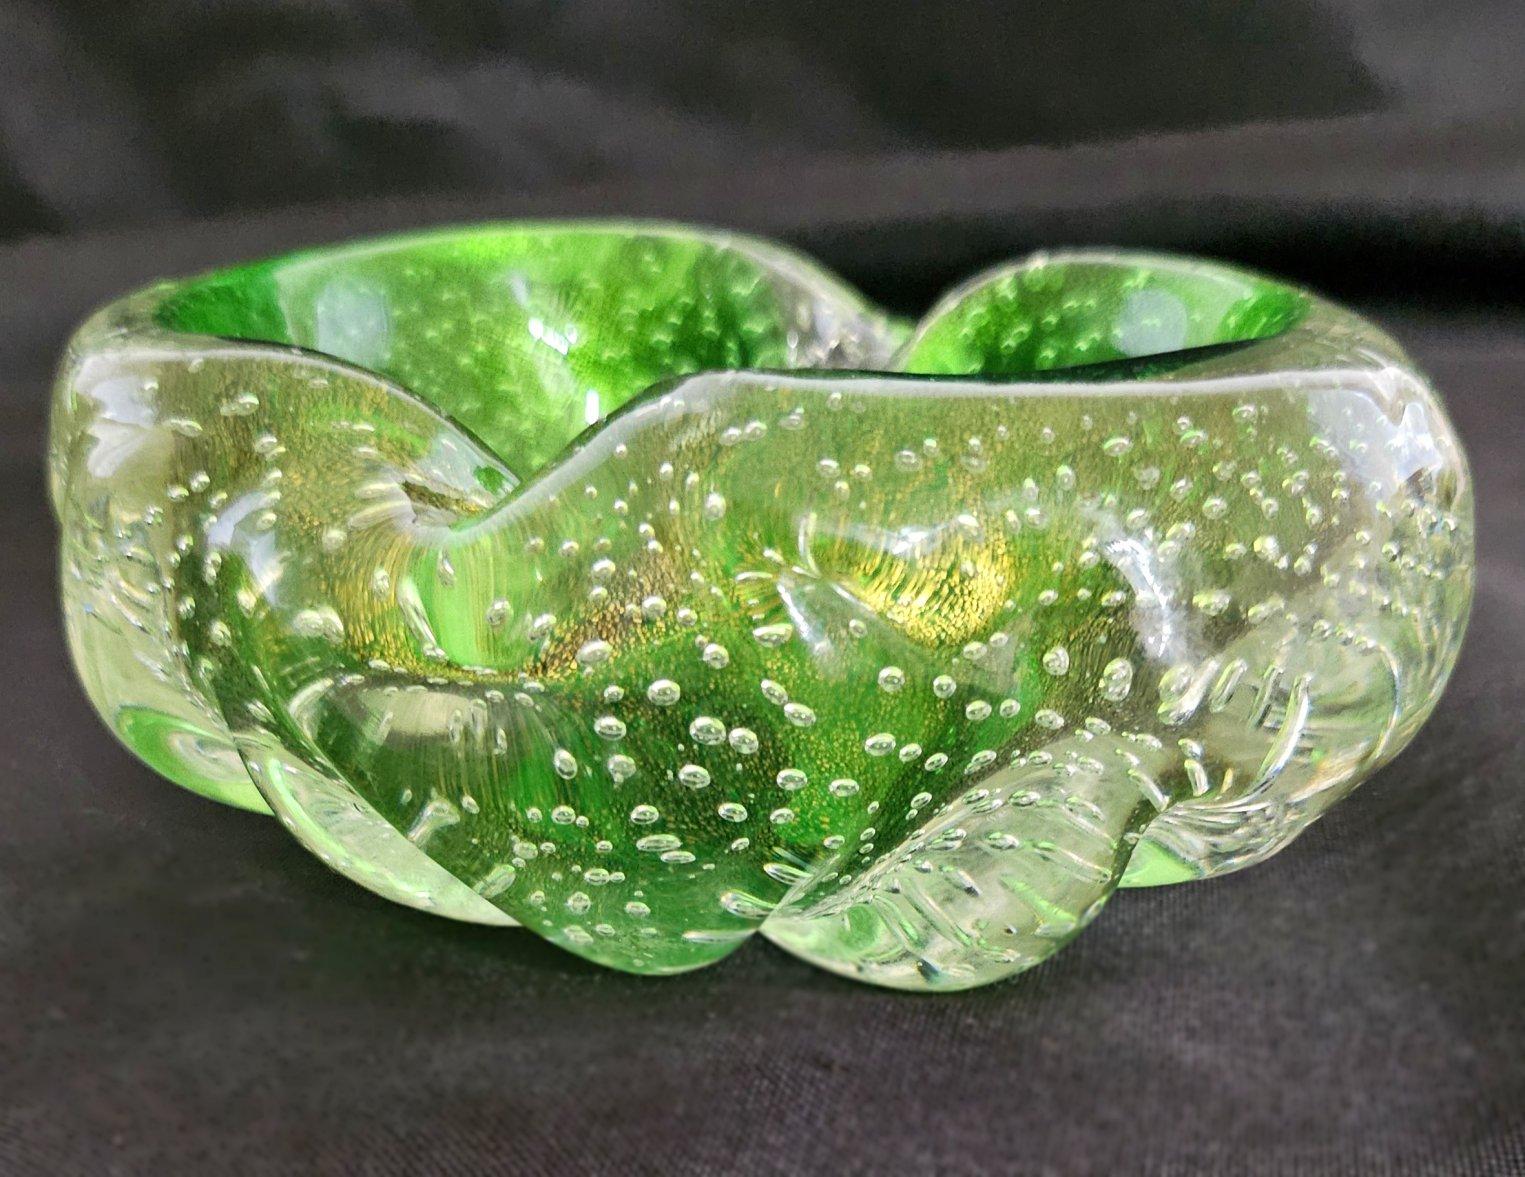 Vtg Murano Glass Bugne Ashtray, Bullicante, Subtle Gold Polveri, Barovier & Toso 
Very good vintage condition. No chips or cracks.
Measures about 5.25 x 4.5 x 2 inches.

In some environments it looks mostly green; in others the gold dust shows more